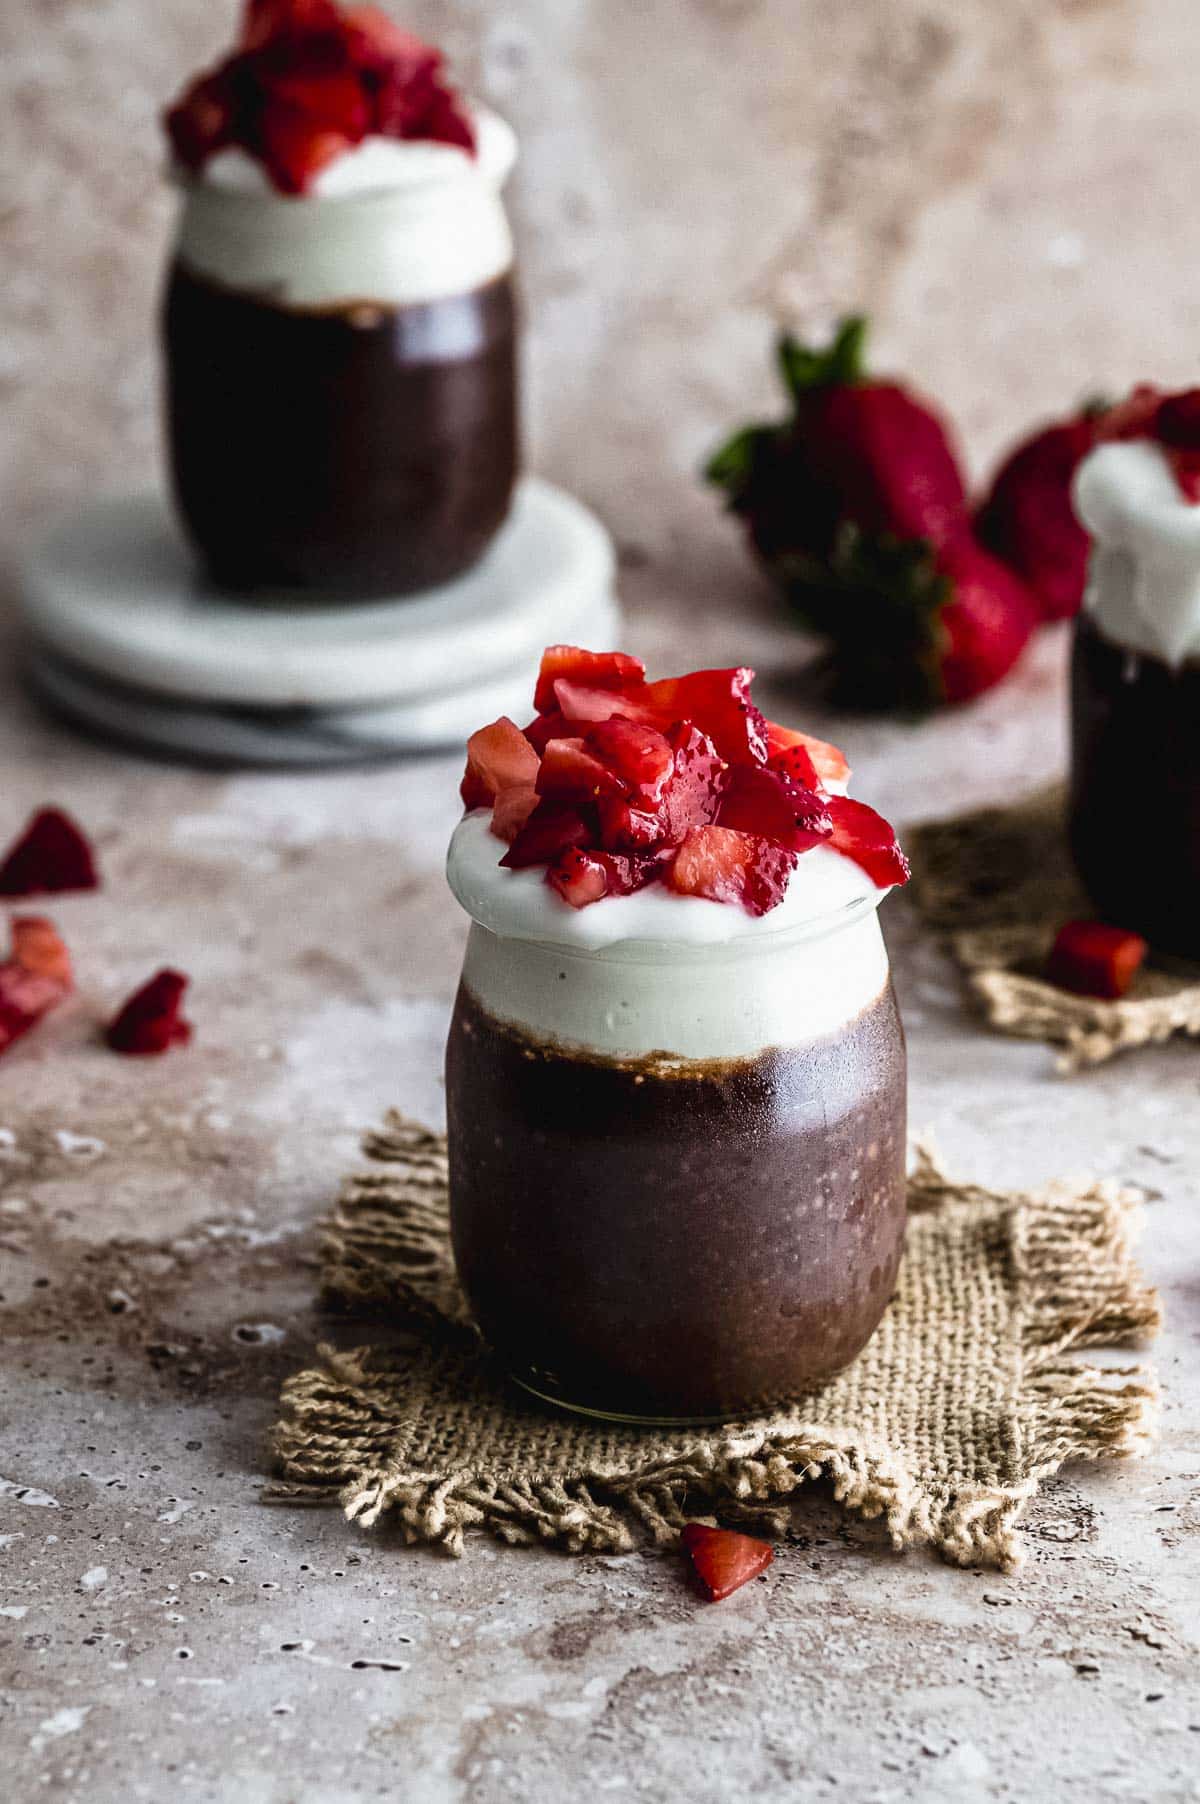 CLose up view of a small glass jar filled with chocolate chia pudding